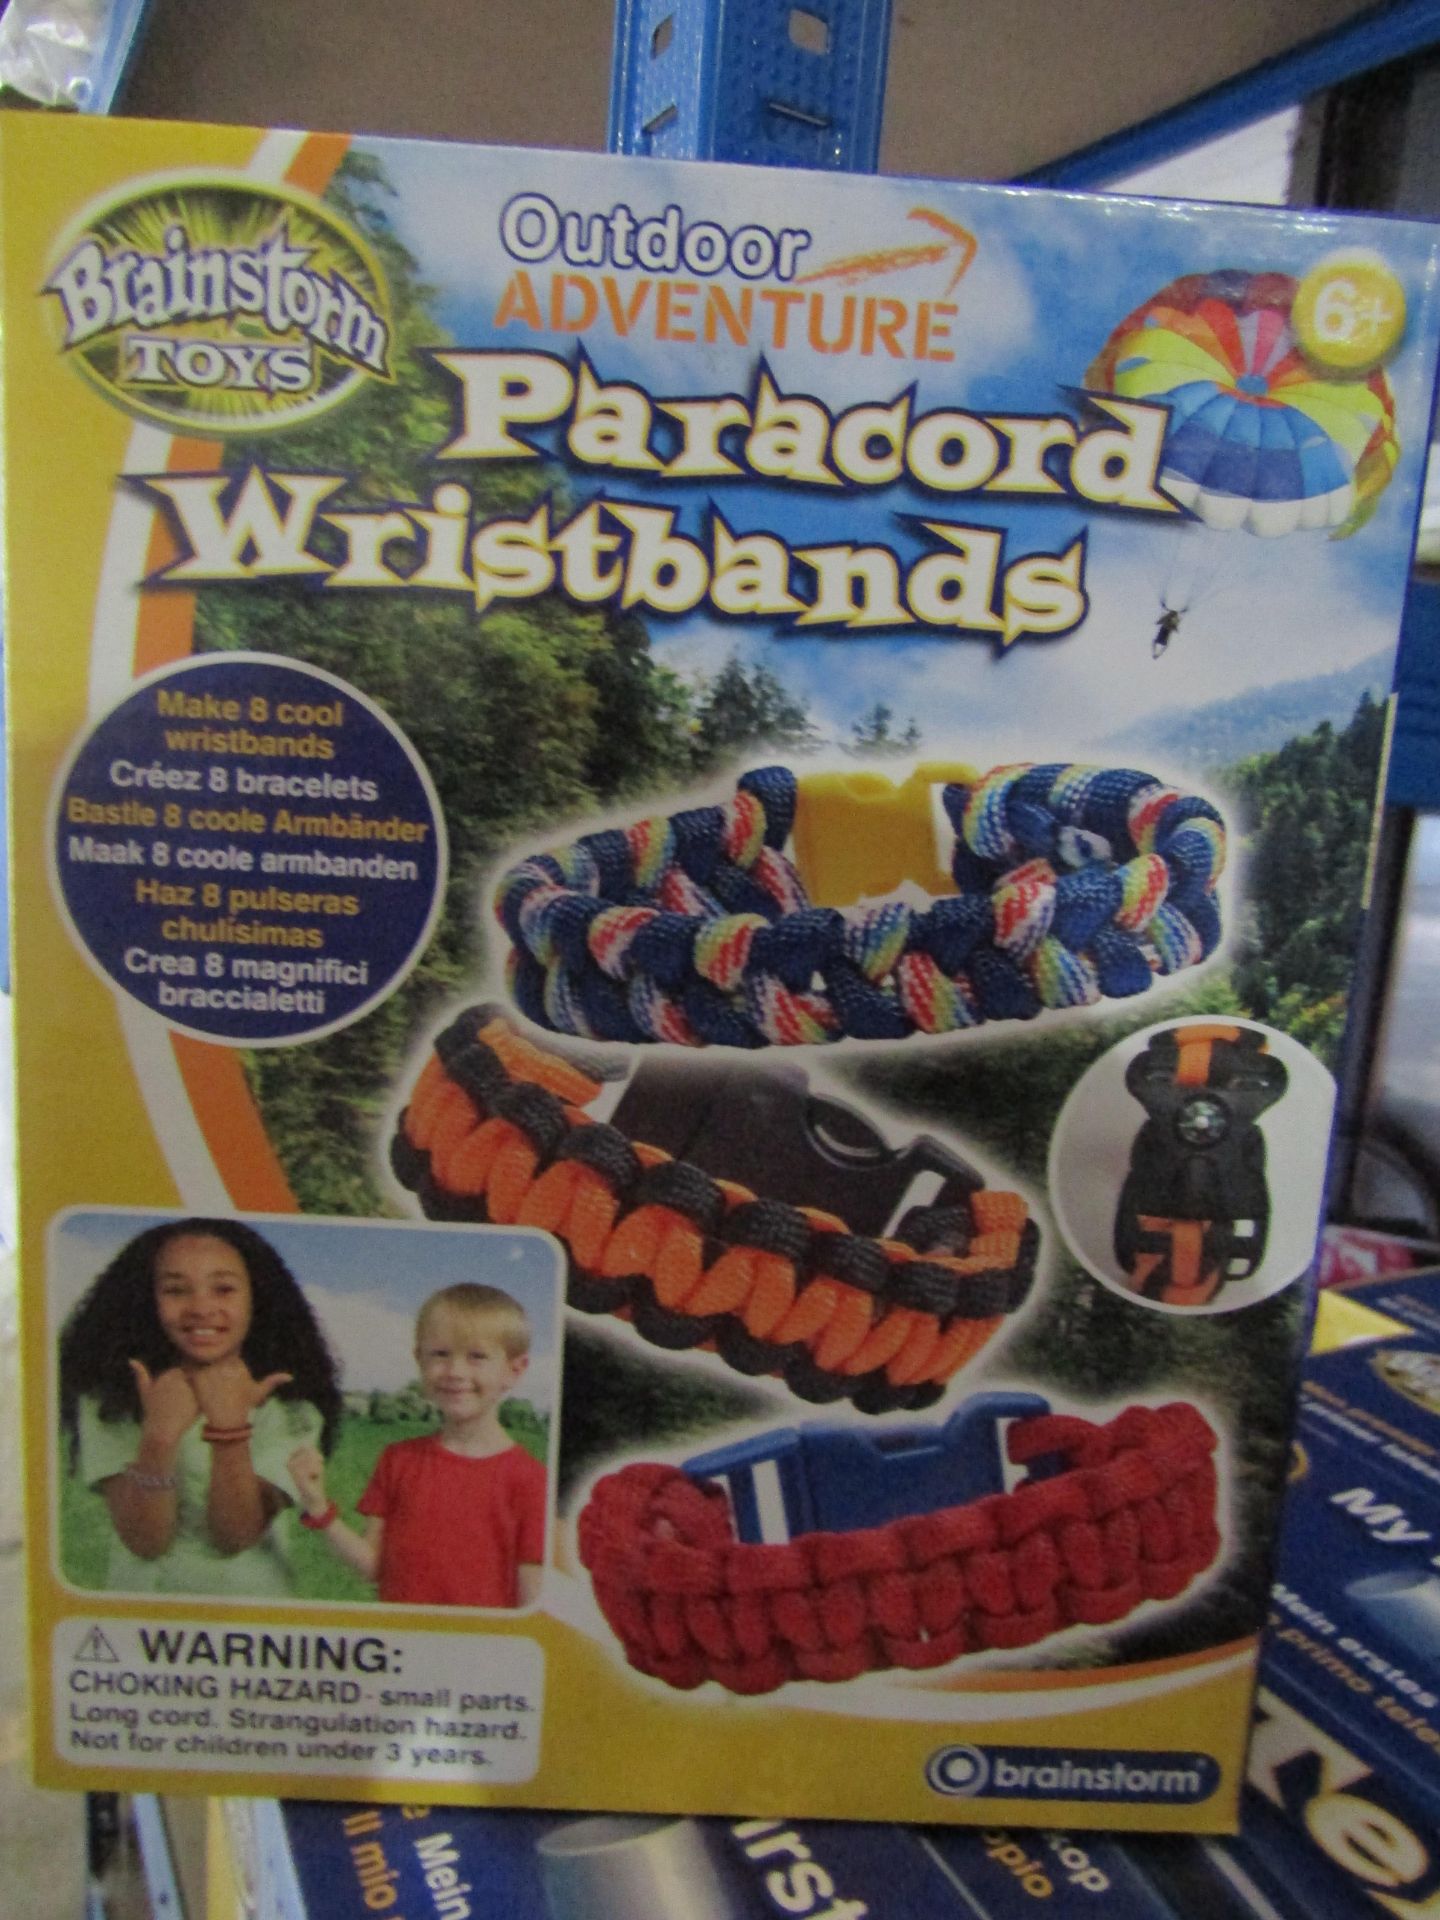 Brainstorm Paracord Wristbands ( Make 8 Cool Wristbands )New & Boxed